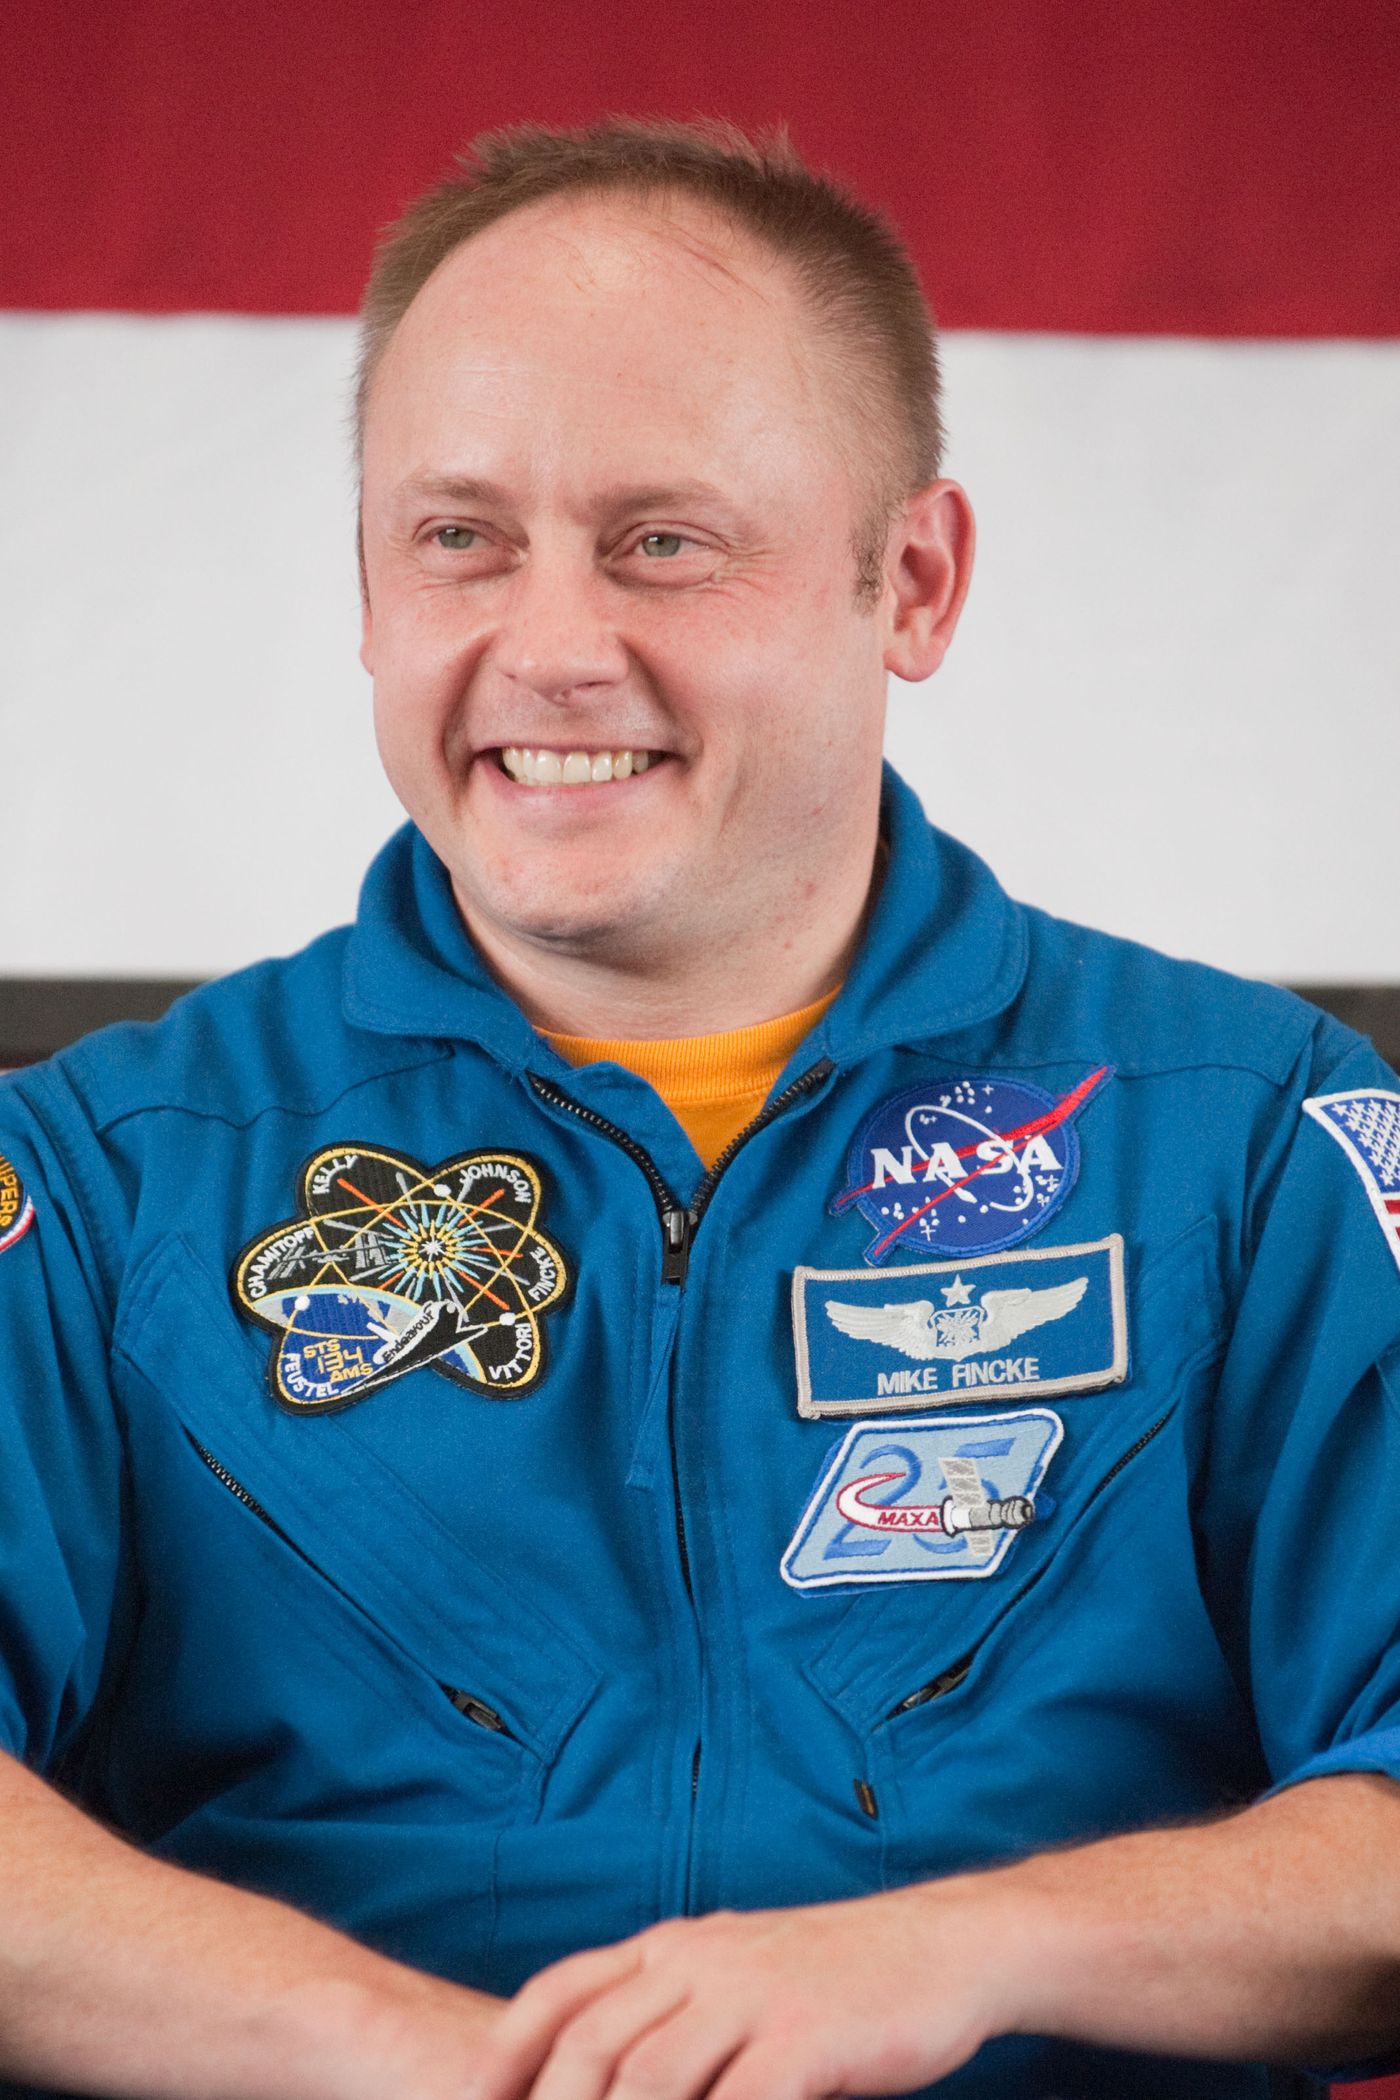 This is astronaut Mike Fincke. He will replace Eric Boe on Boeing's first crewed mission this year.